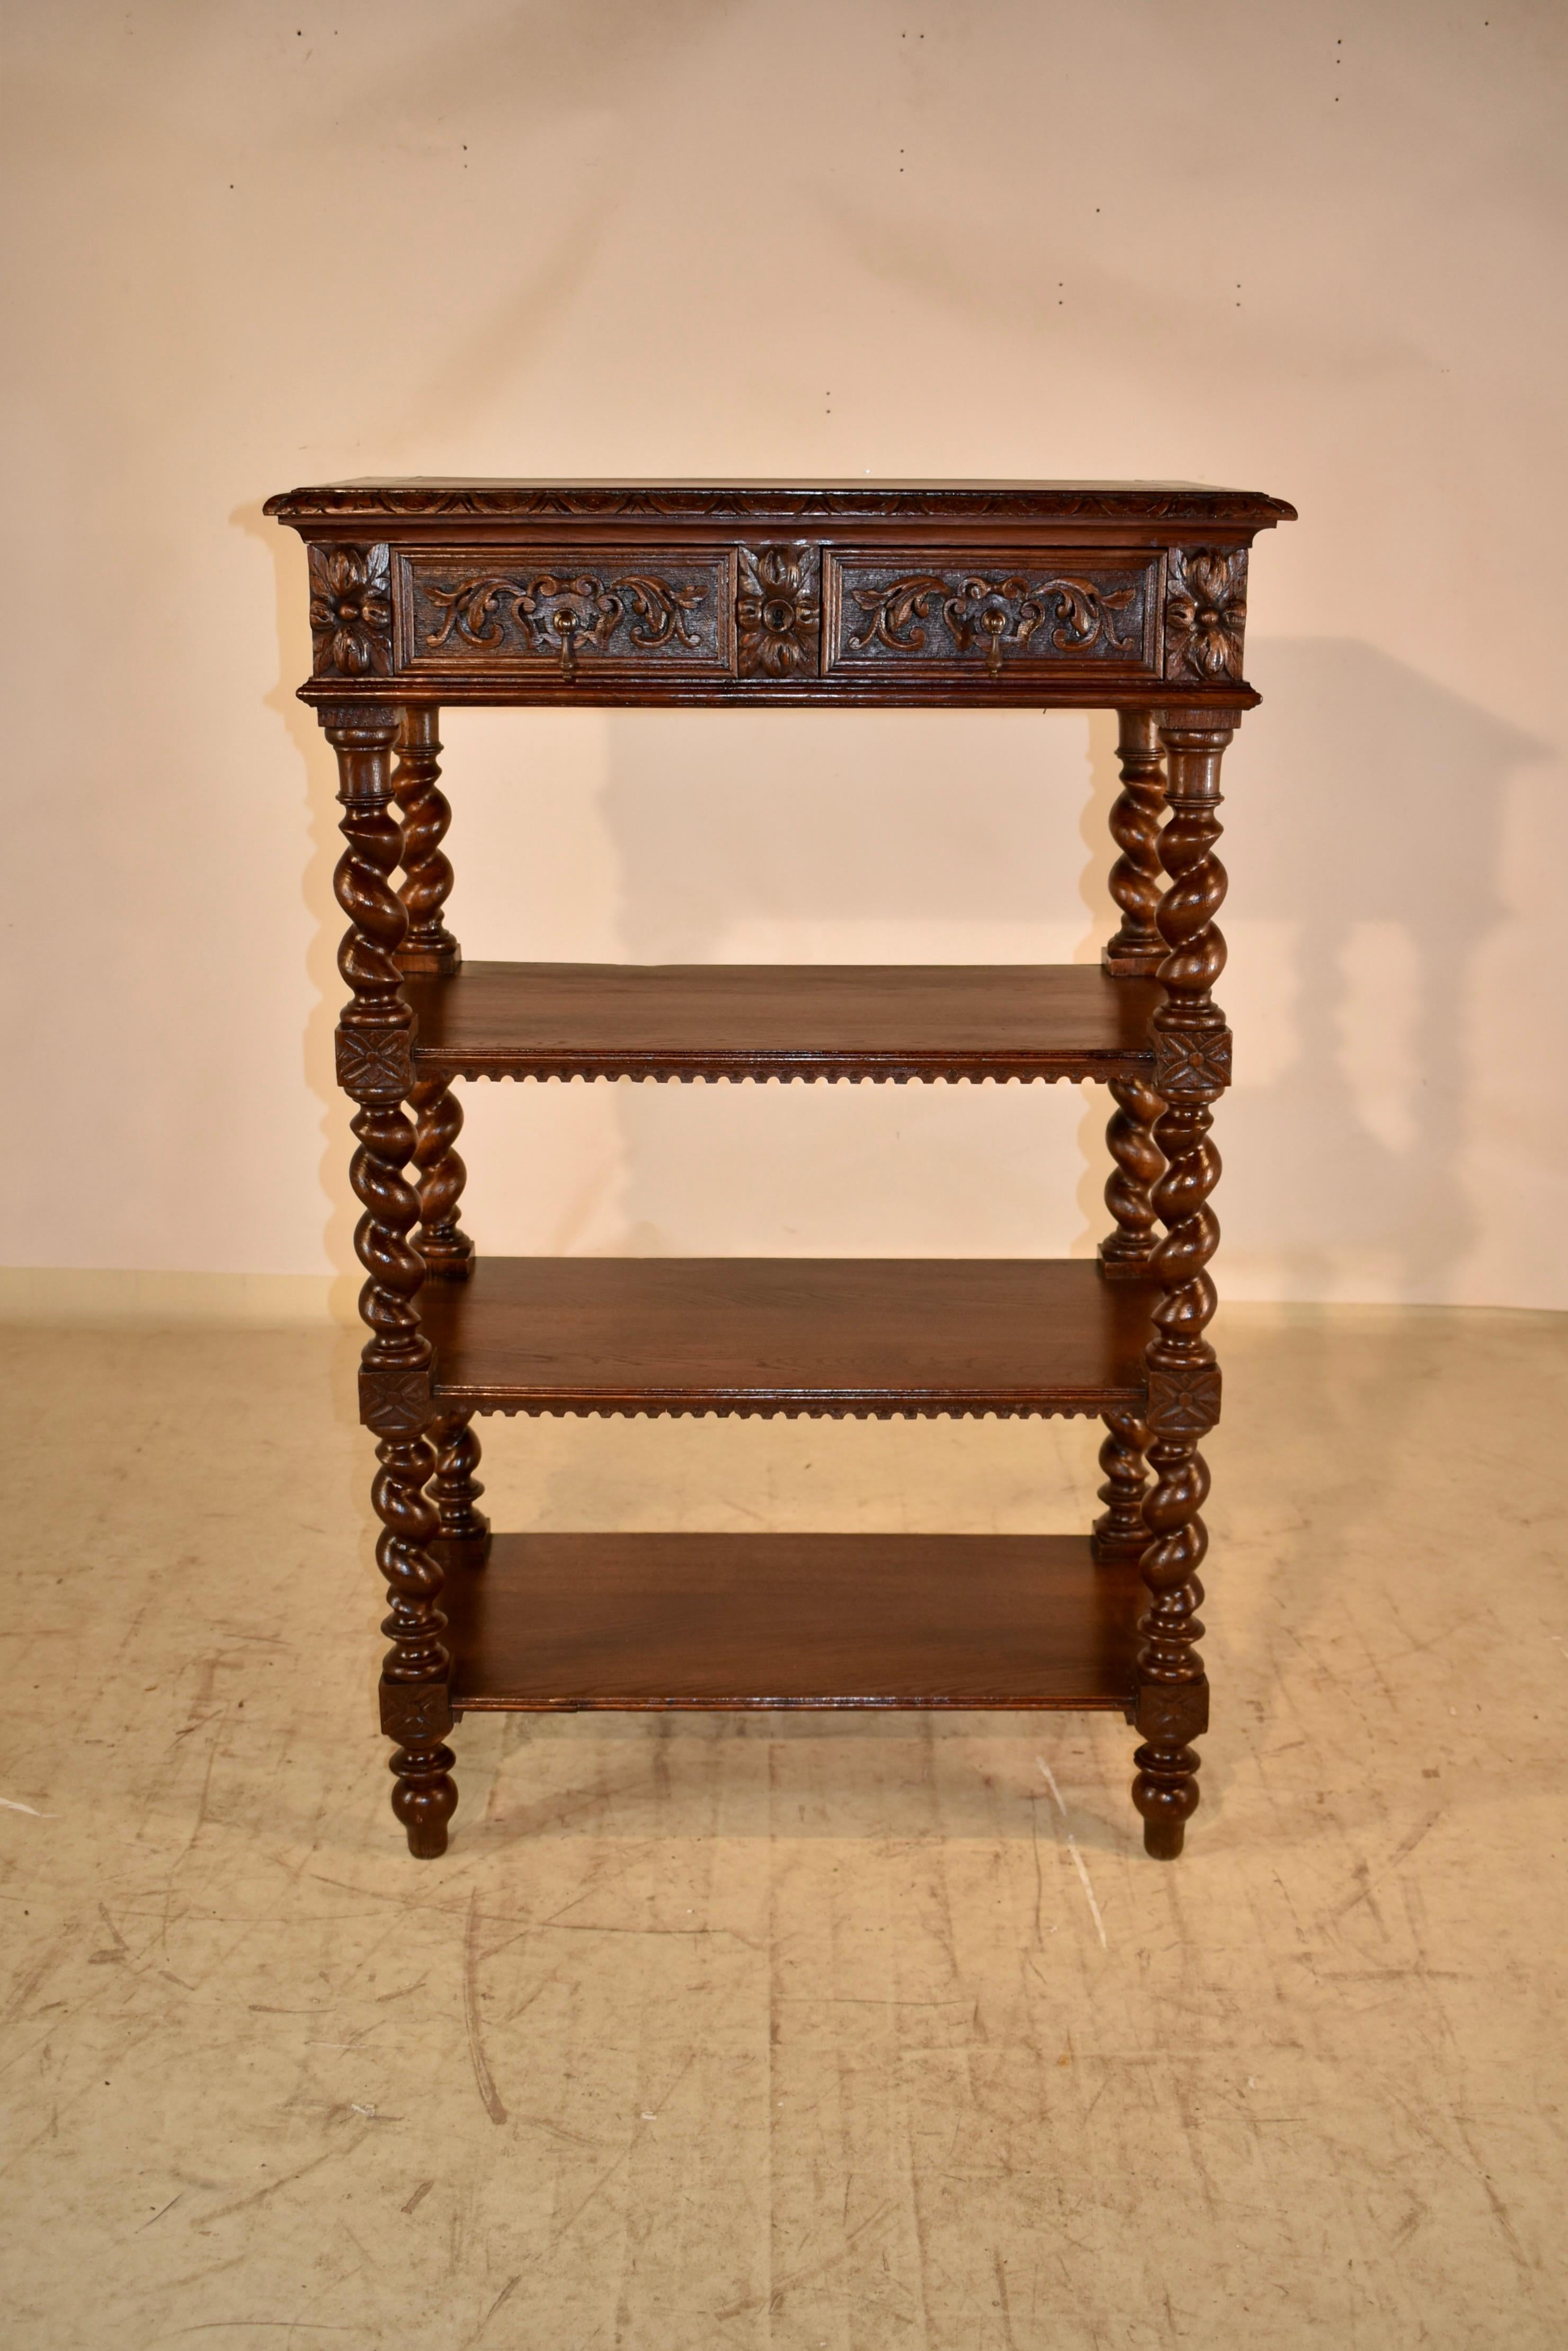 19th century tall oak dessert buffet from France. The top is banded and has a beveled and carved edge around the top, following down to paneled sides and two paneled and hand carved decorated drawers in the front. There are three lower shelves,